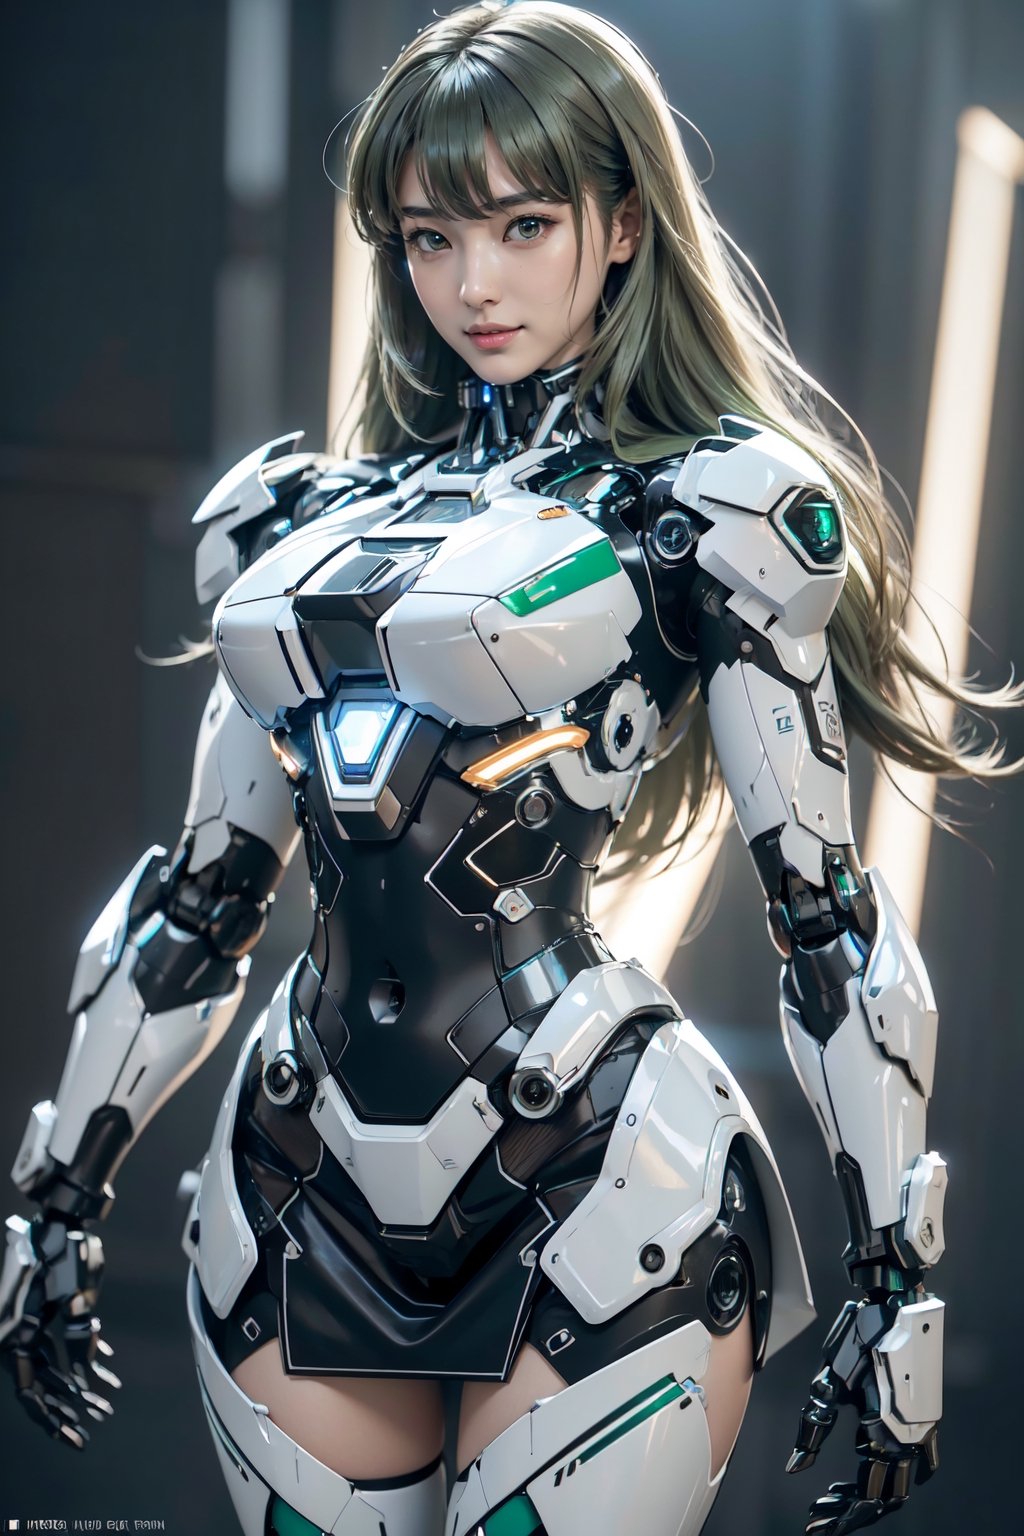 RAW picture, Best picture quality, high resolution, 8k, realistic, sharp focus, realistic image of elegant lady, Korean beauty, supermodel, incredibly absurdres) break. (radiant Glow), (sparkling suit) ,break. ((One android girl)), ((curvy boby)), (smiling), break. (green long hair:1.4), ((LED lighting parts on her body:1.2)), break. ((extremely detailed mecha suit with short skirt:1.2)), break. (robotic arms), (robotic legs), (robotic hands), ((robotic joint)), break. ((Cinematic angle)), ultra fine quality, masterpiece, best quality, incredibly absurdres, fhighly detailed, highres, high detail eyes, high detail background, sharp focus, (photon mapping, radiosity, physically-based rendering, automatic white balance), masterpiece, best quality, ((Mecha body)), furure_urban, incredibly absurdres, dress, masterpiece, masterpiece, best quality,Mecha body,Colorful portraits,robot,Mecha